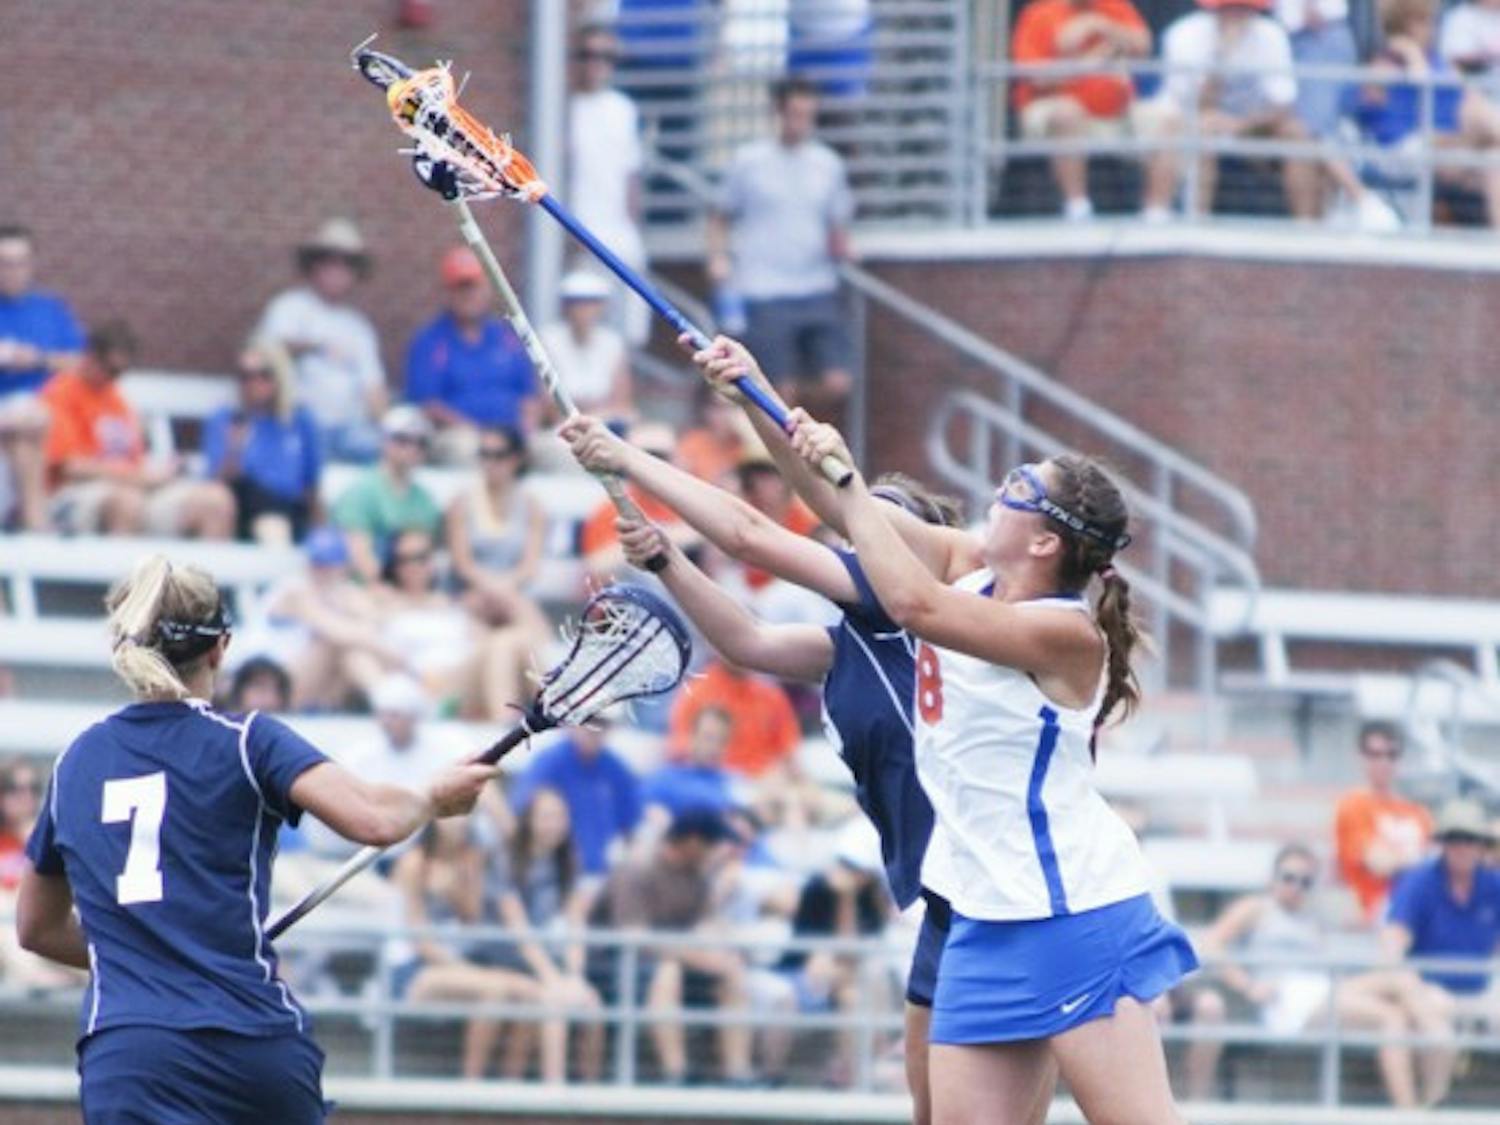 Shannon Gilroy fights for possession against Penn State in Florida’s Elite Eight win Saturday. Gilroy scored two goals and led the Gators with six draw controls in the 15-2 victory.